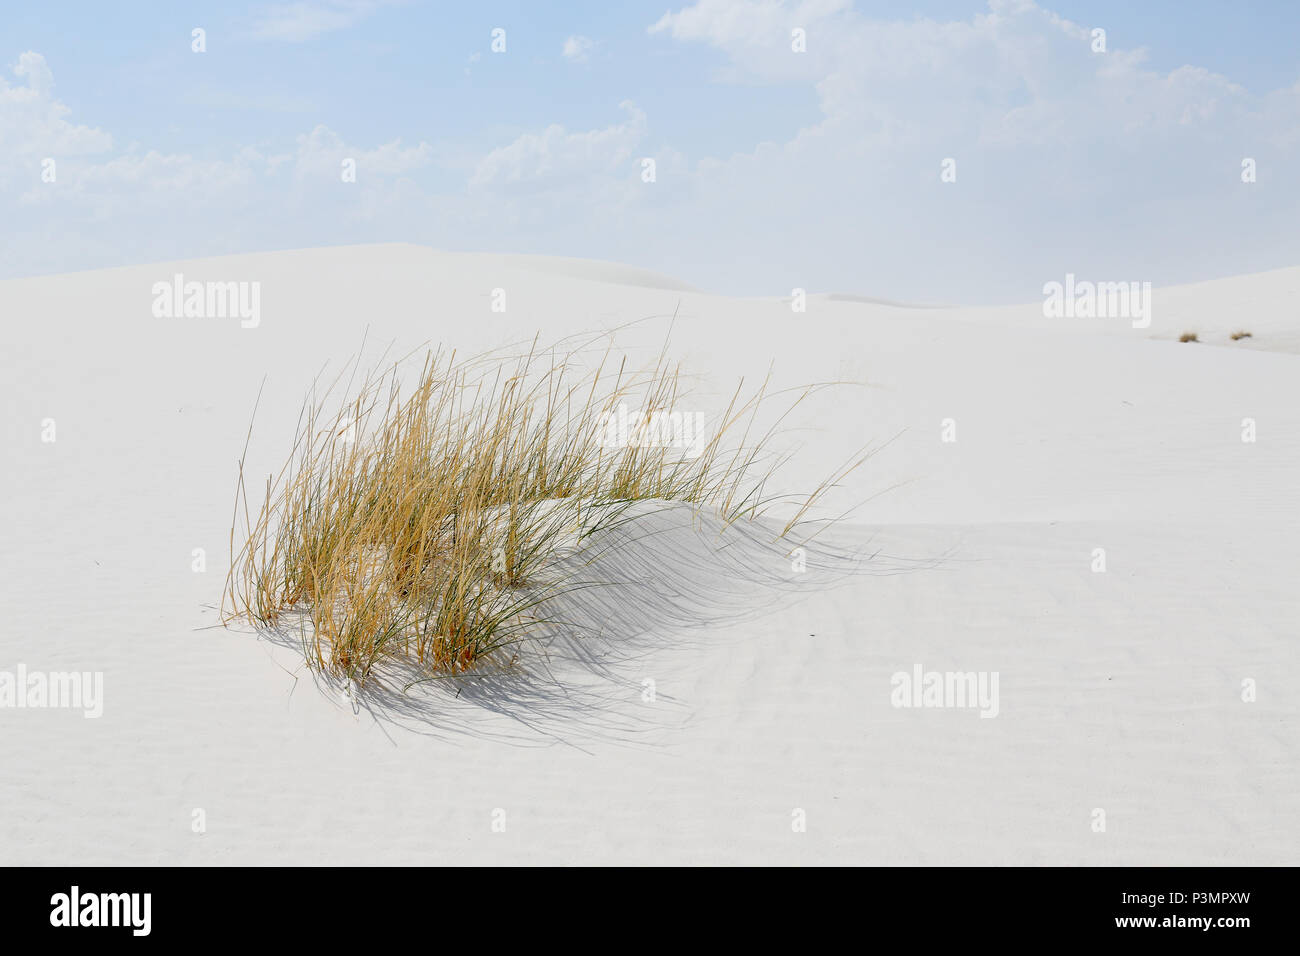 White sand dunes and grasses on a day with blue skies and clouds Stock Photo